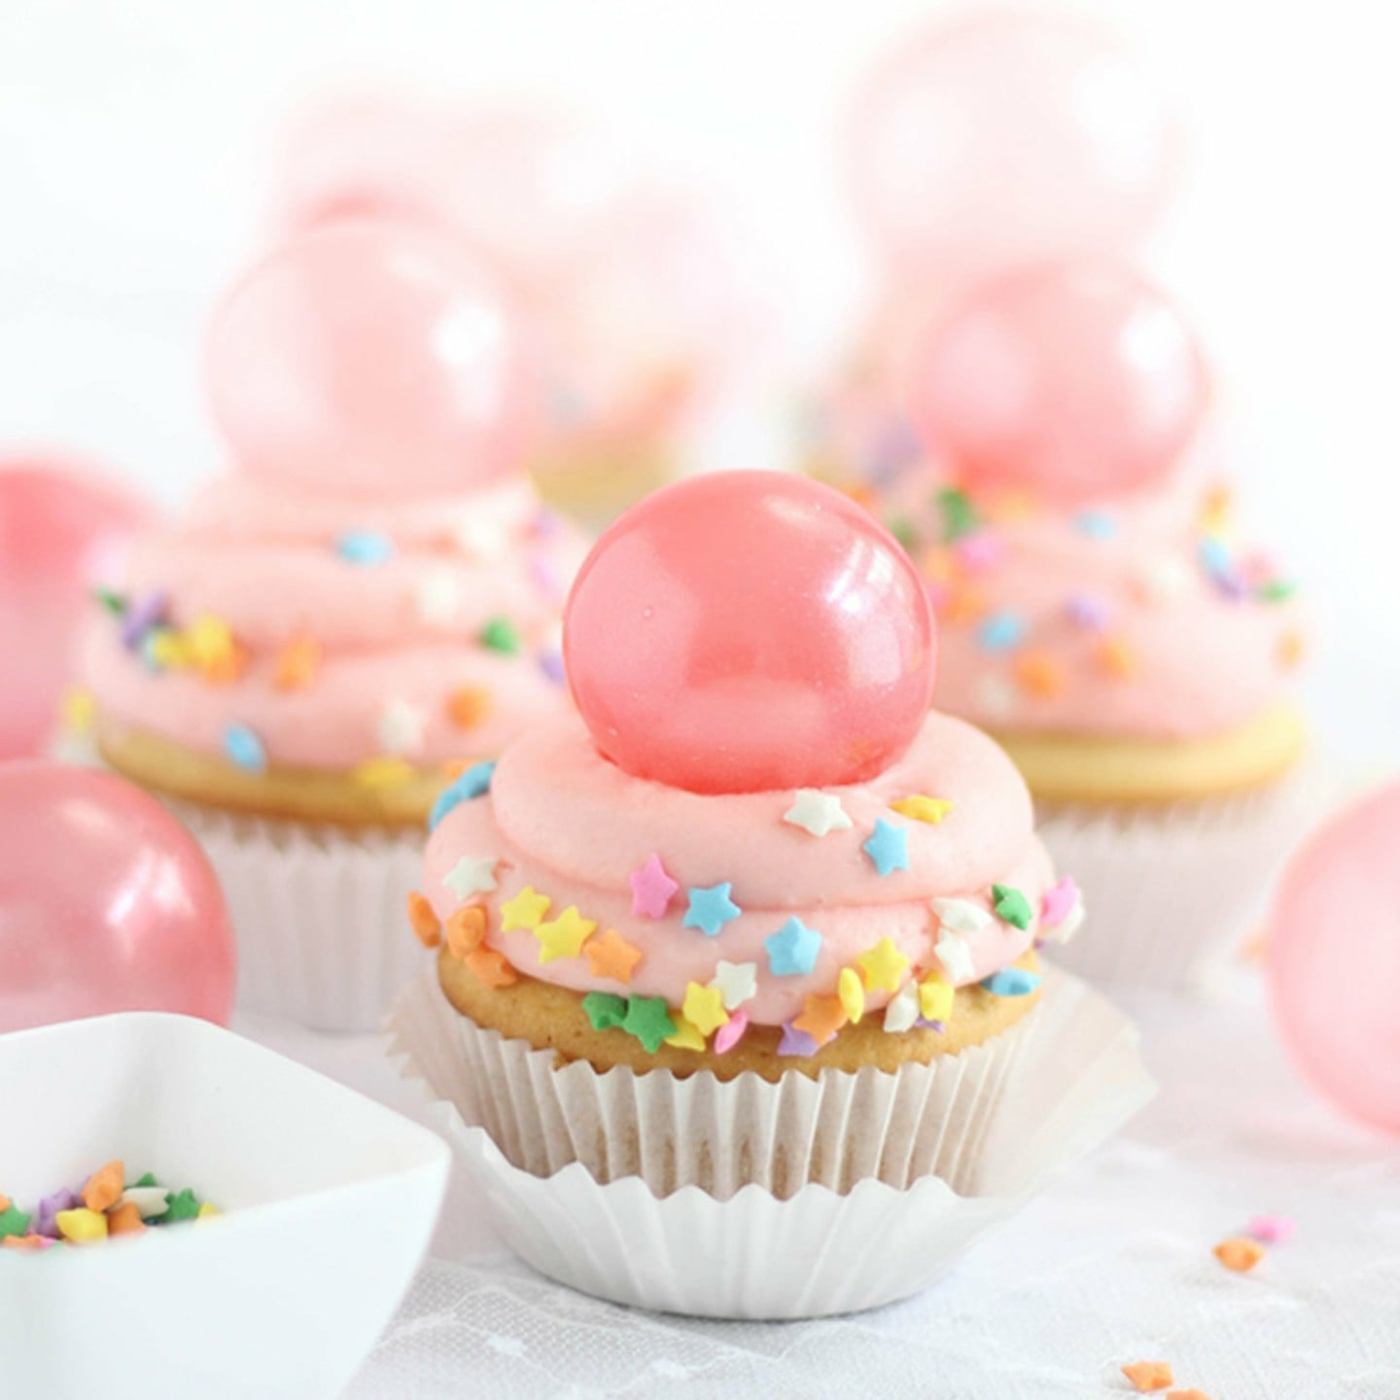 Romantic cupcakes with pink topping, starfish streusel and pink gelatin balls